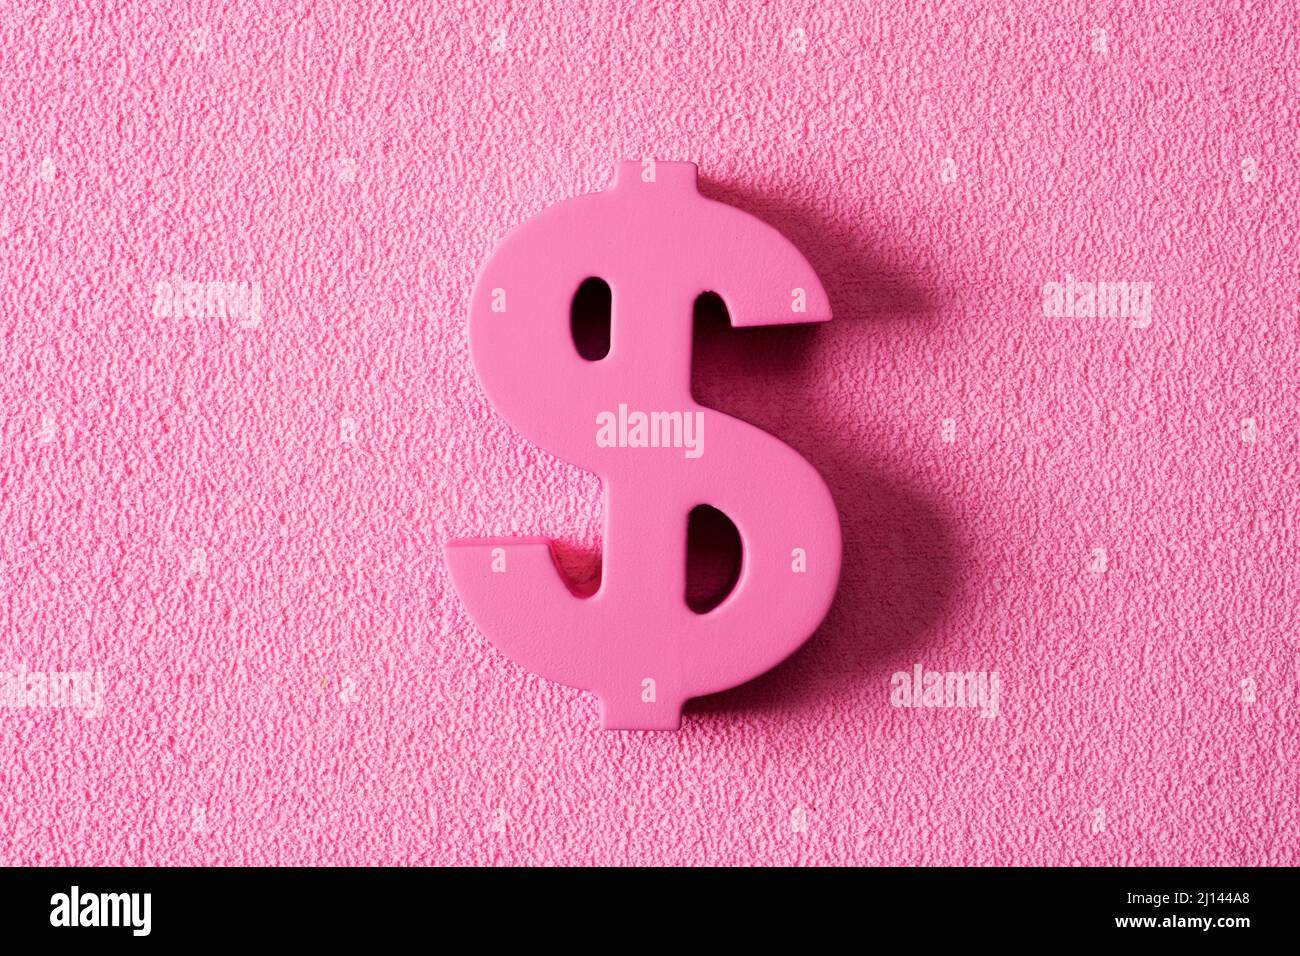 closeup of a pink dollar sign on a textured pink background, depicting the pink money or pink capitalism concepts Stock Photo